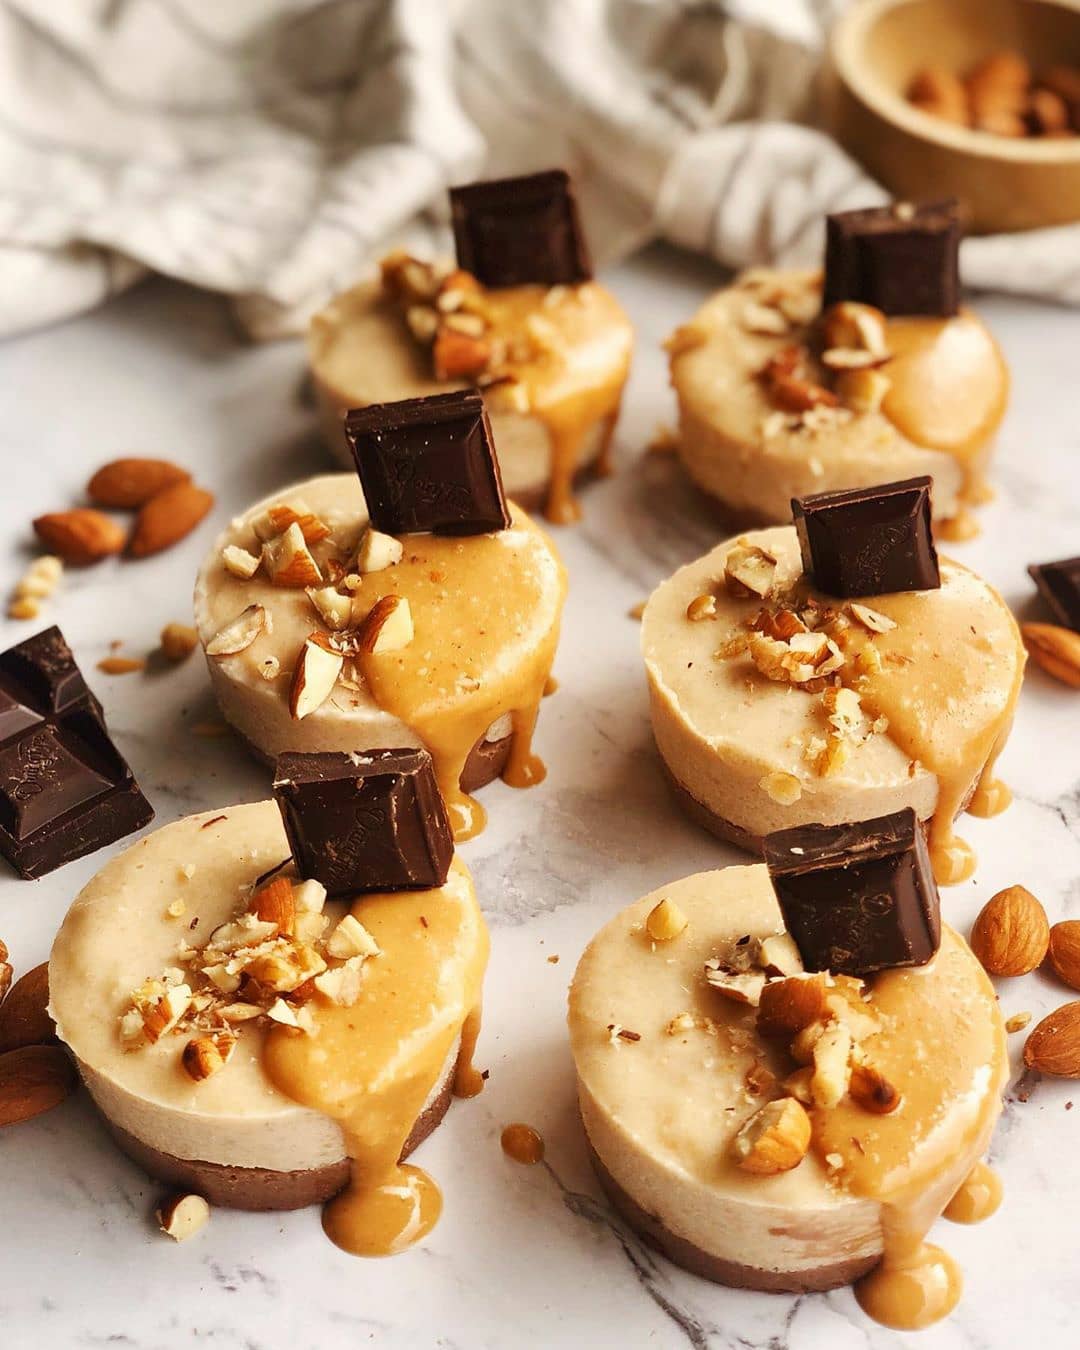 Salted Caramel Peanut Butter Cheesecakes